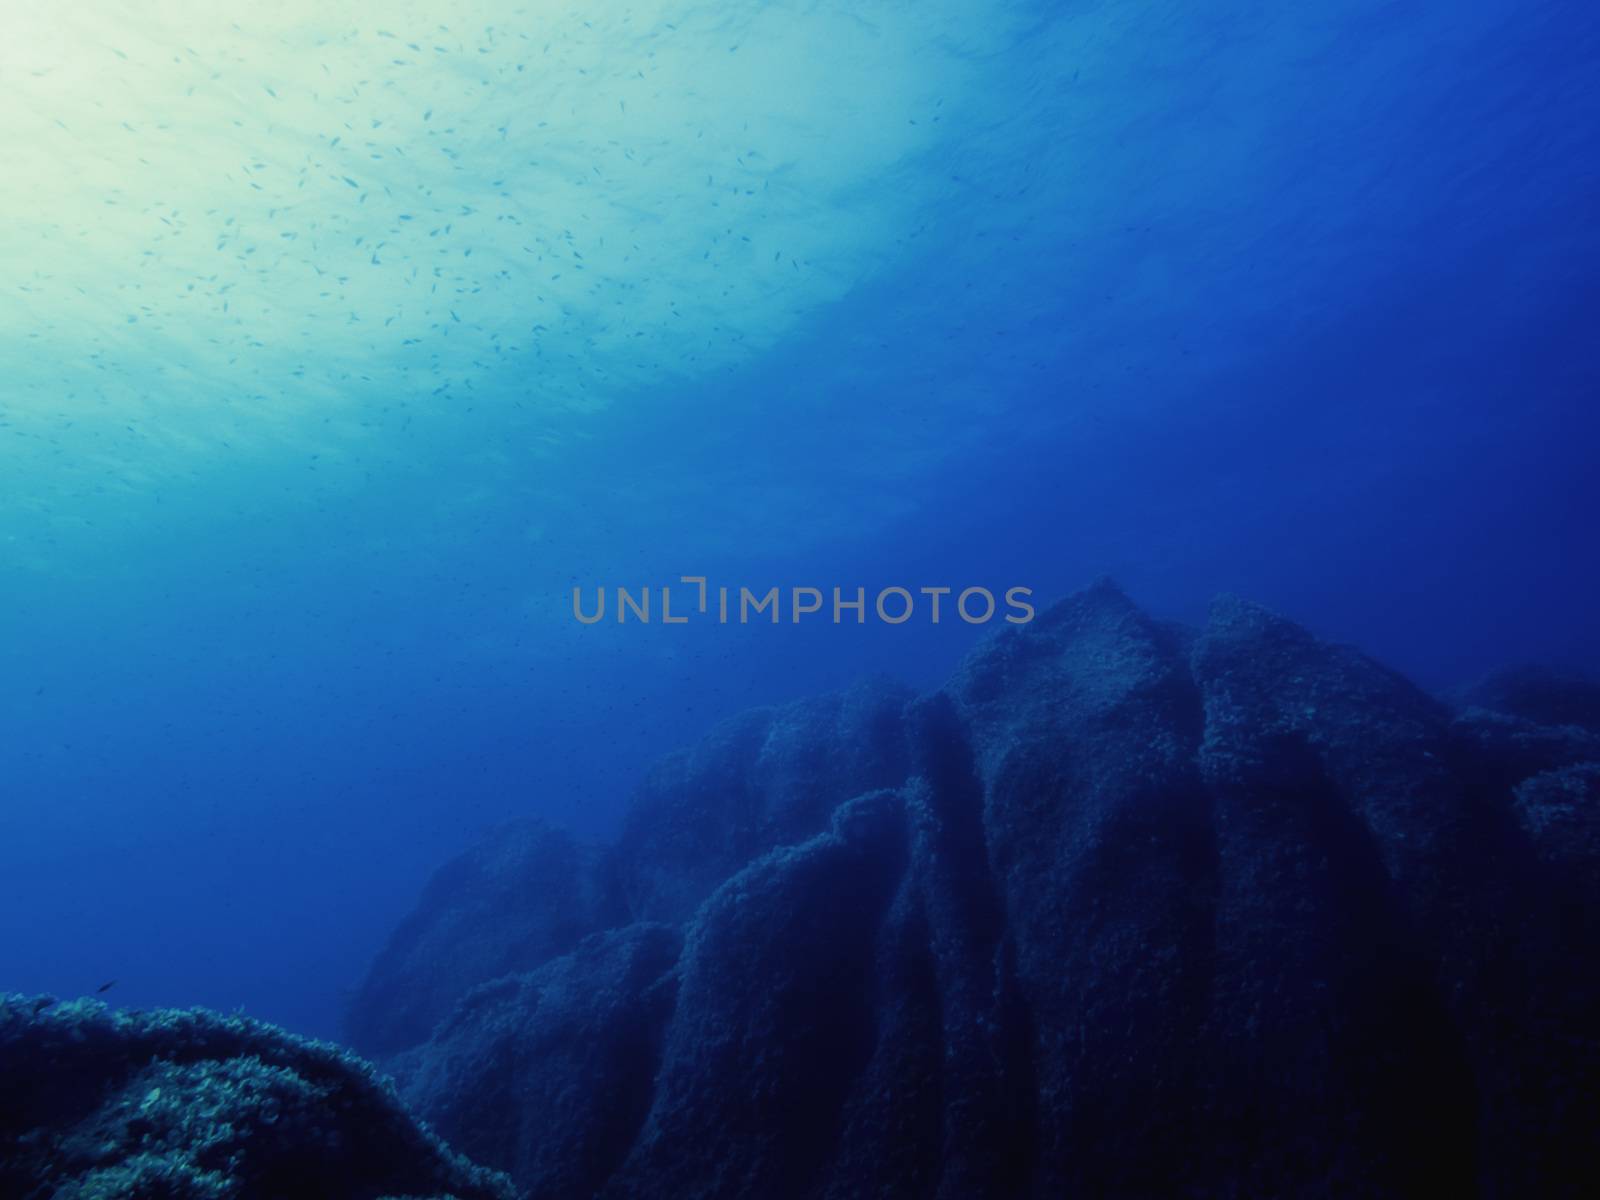 underwater background with a rocky sea bottom by raulmelldo